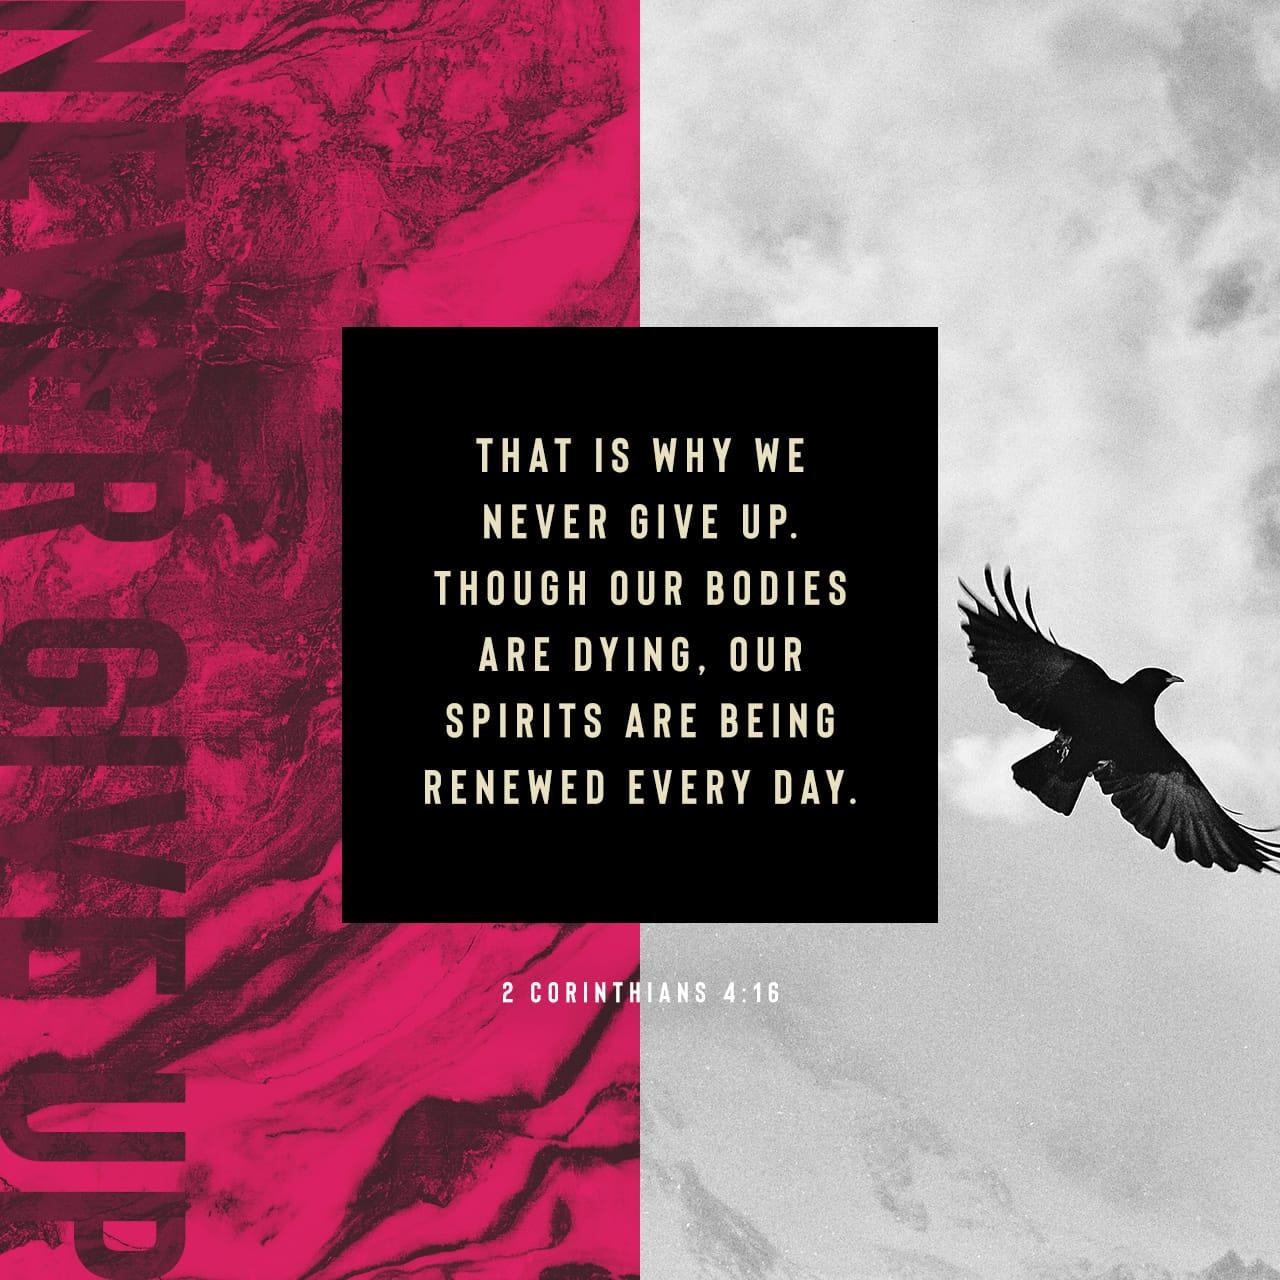 Bible Verse of the Day - day 91 - image 32905 (2 Corinthians 4:16)